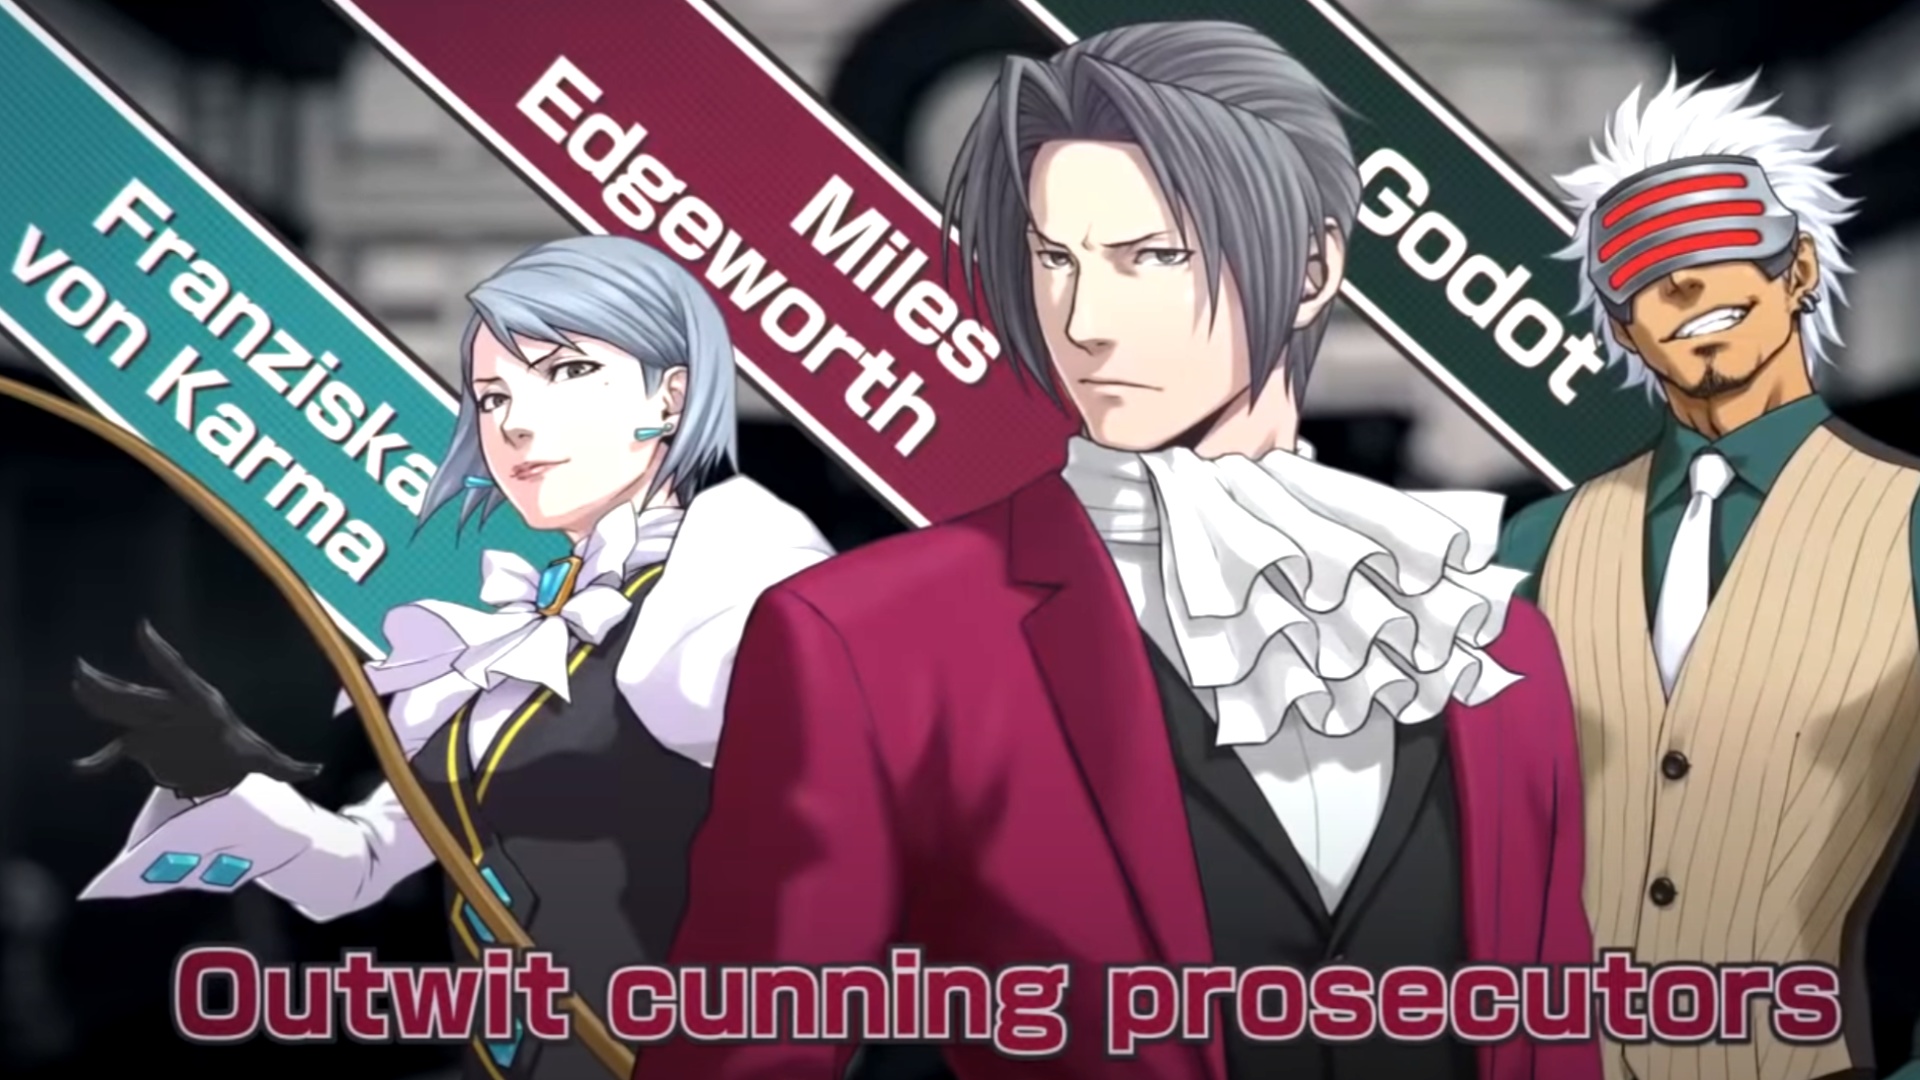 (All three prosecutors are more than just annoying rivals. on the other side of the court. They all tell their own unique stories over the course of the trilogy).